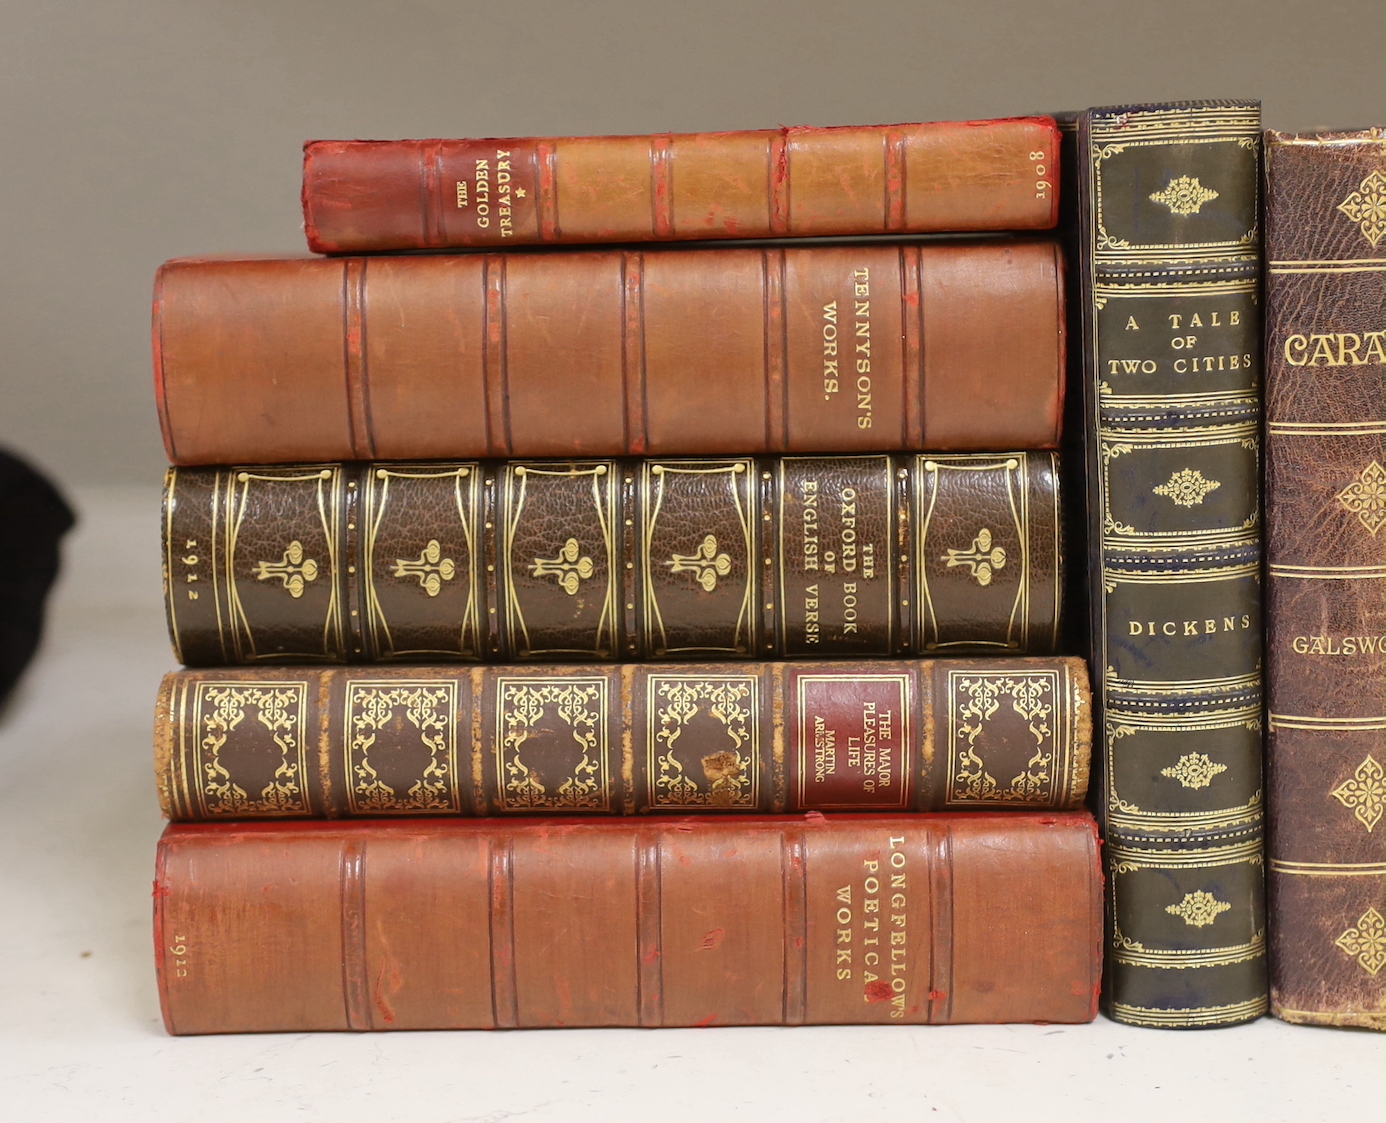 Eighteen volumes full calf leather bindings, including The Great Age of Sail, Shelley’s Poetical Works and other poetry volumes